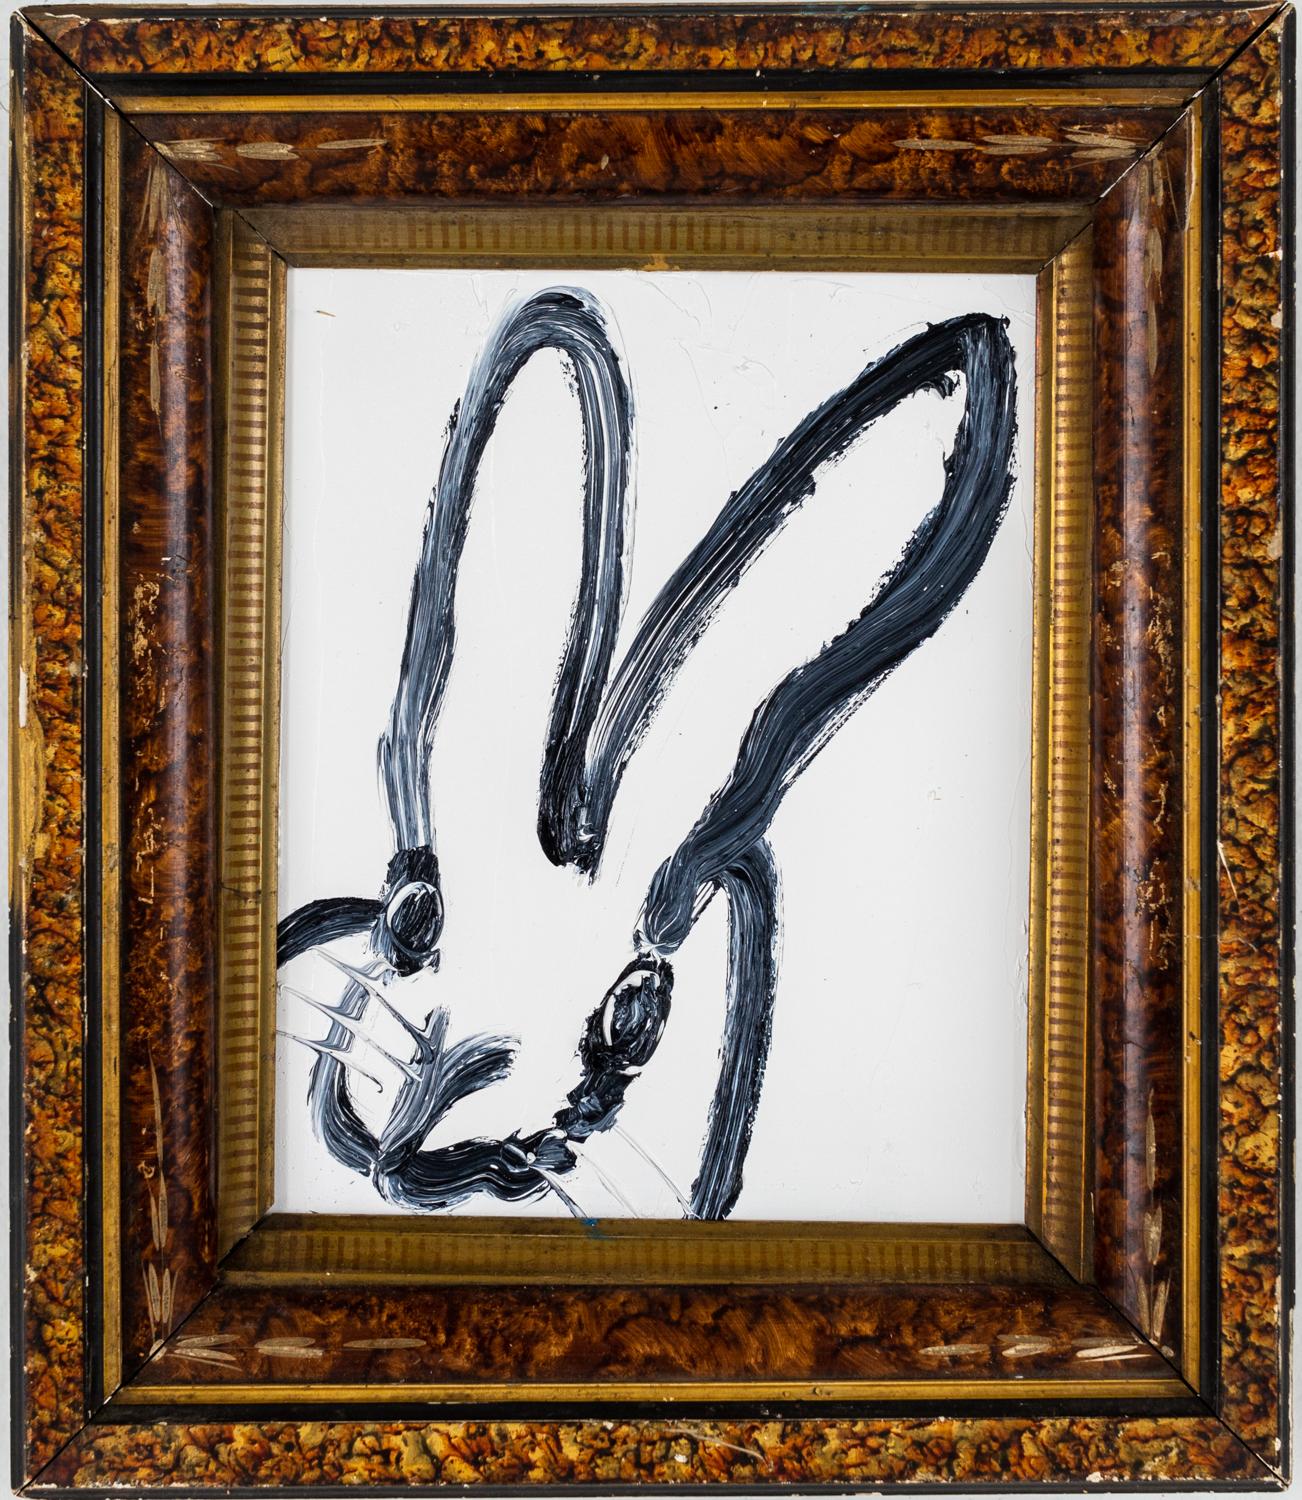 Hunt Slonem "Newel" Bunny
Portrait of bunny on a white background in an antique frame

Unframed: 10 x 8 inches  
Framed: 14.5 x 12.5 inches
*Painting is framed - Please note that not all Hunt Slonem frames are not in mint condition. There may be